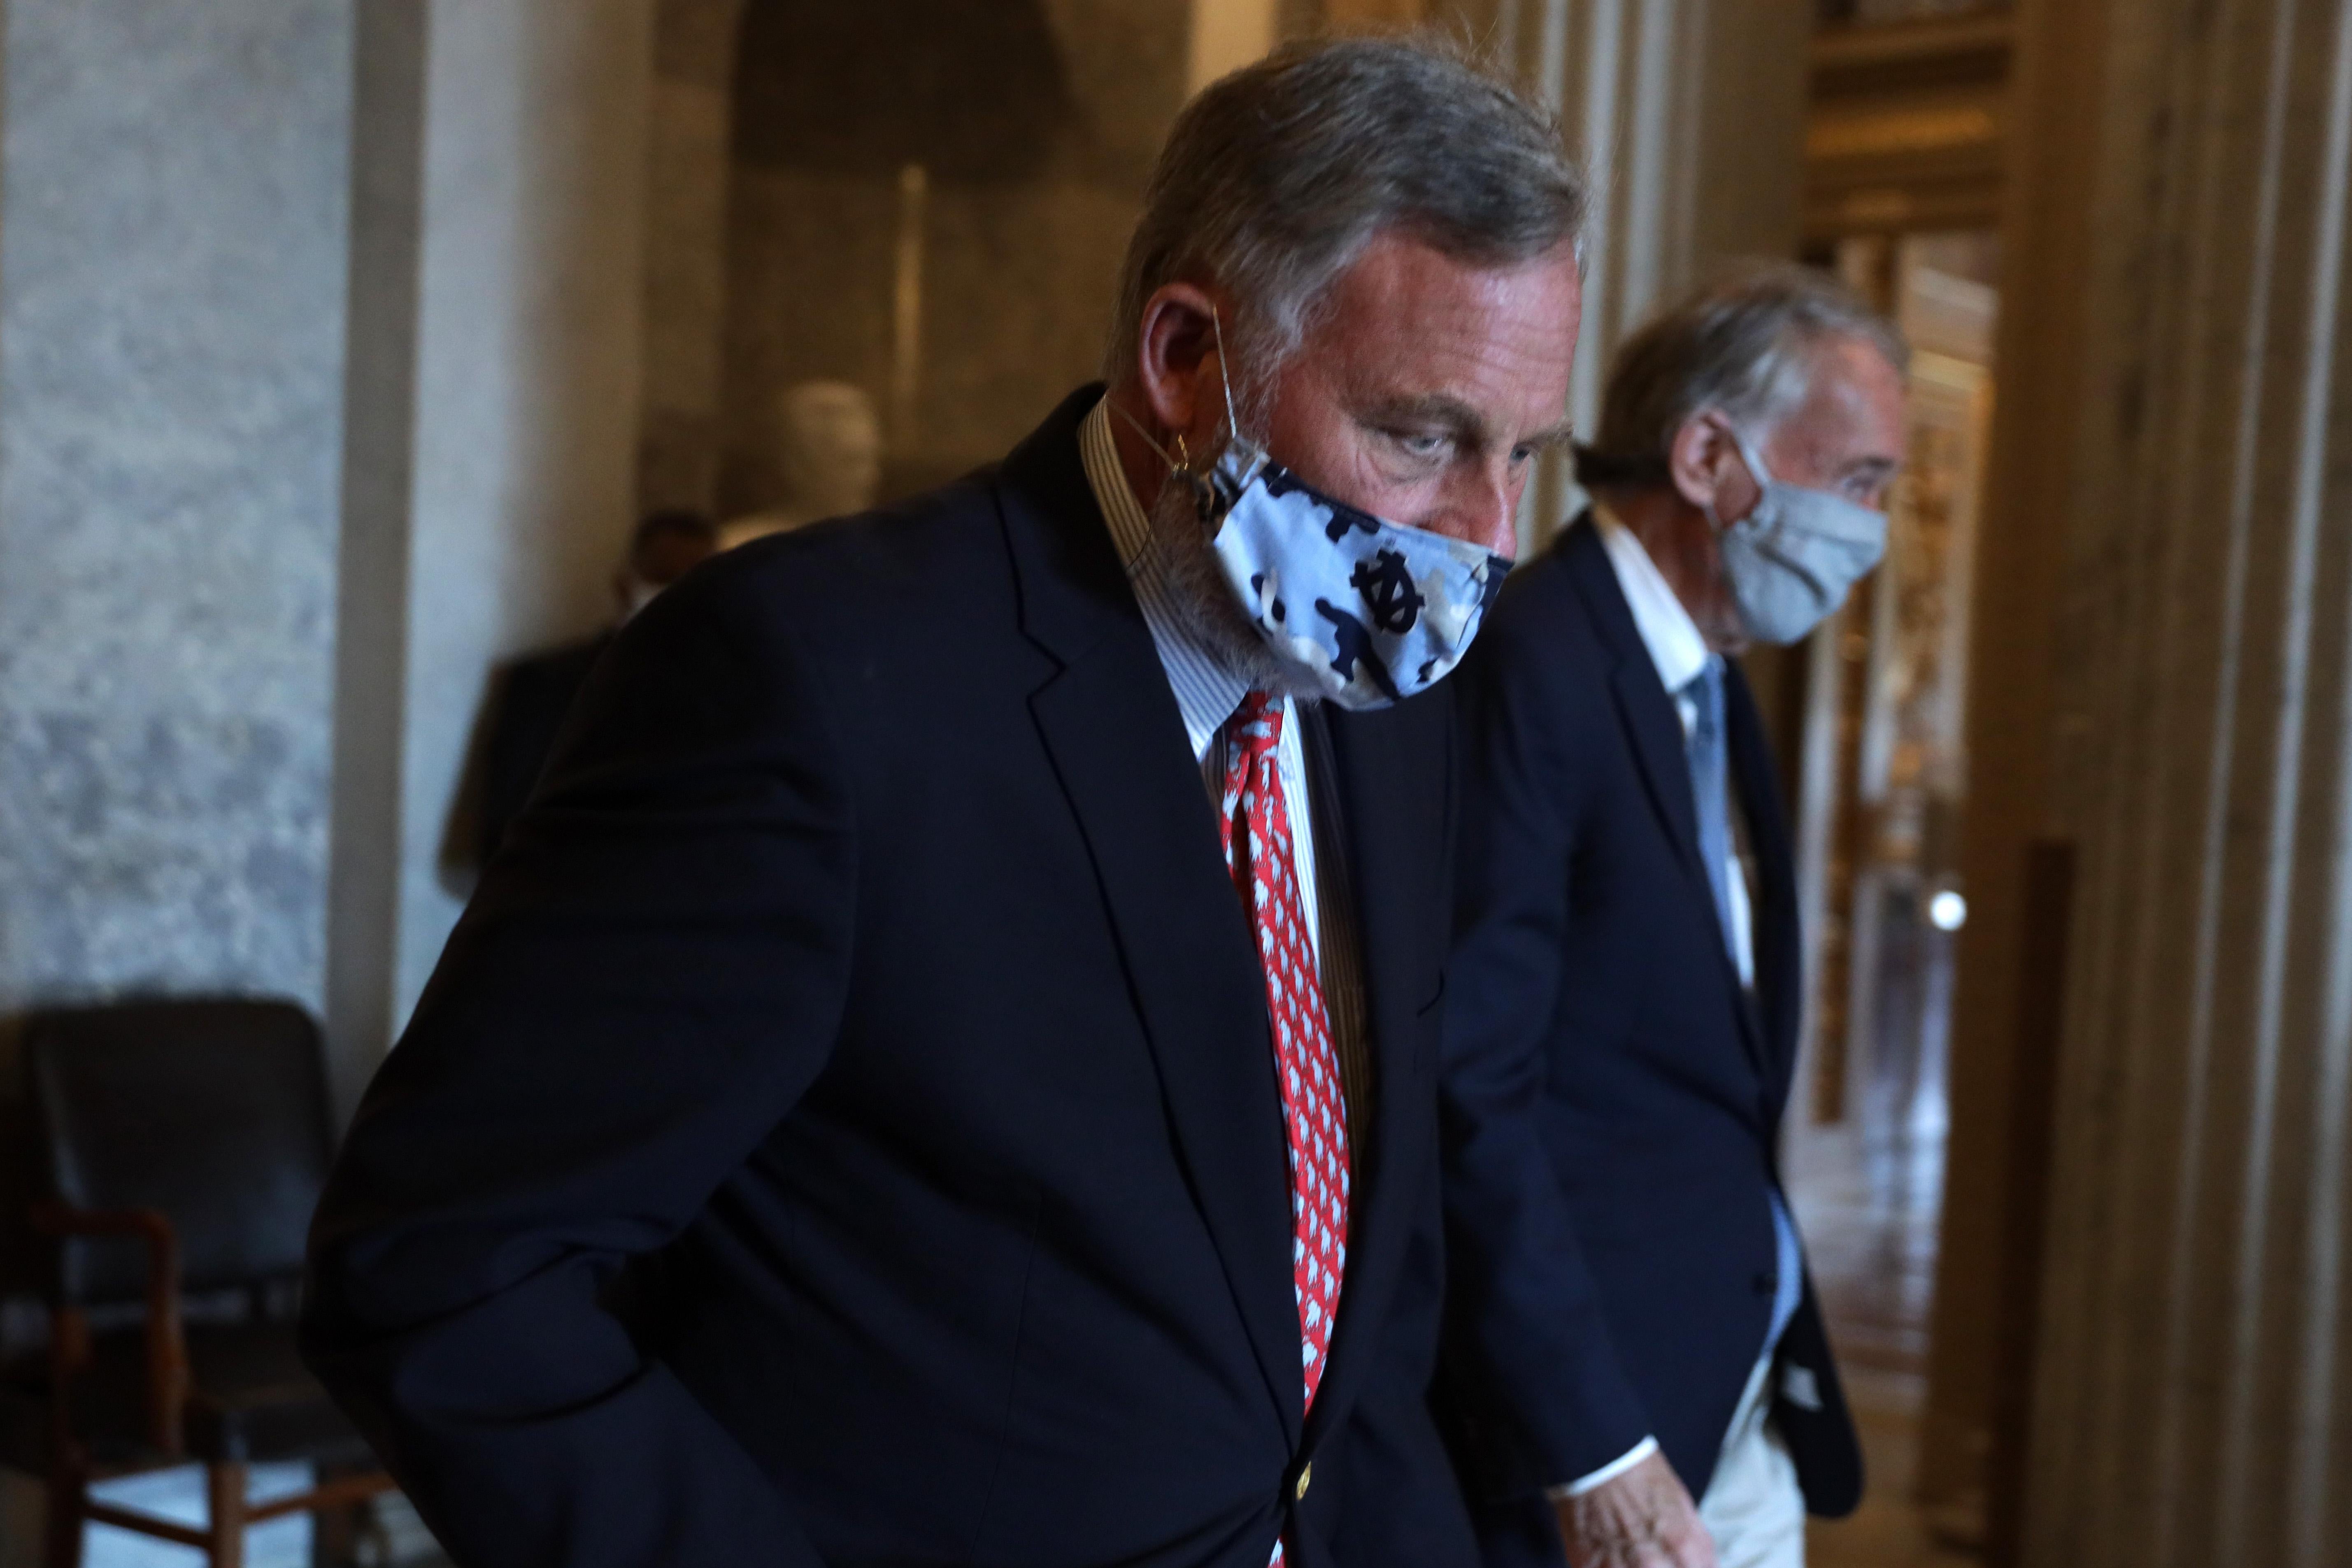 Burr walking with his eyes down, face covered by a mask.